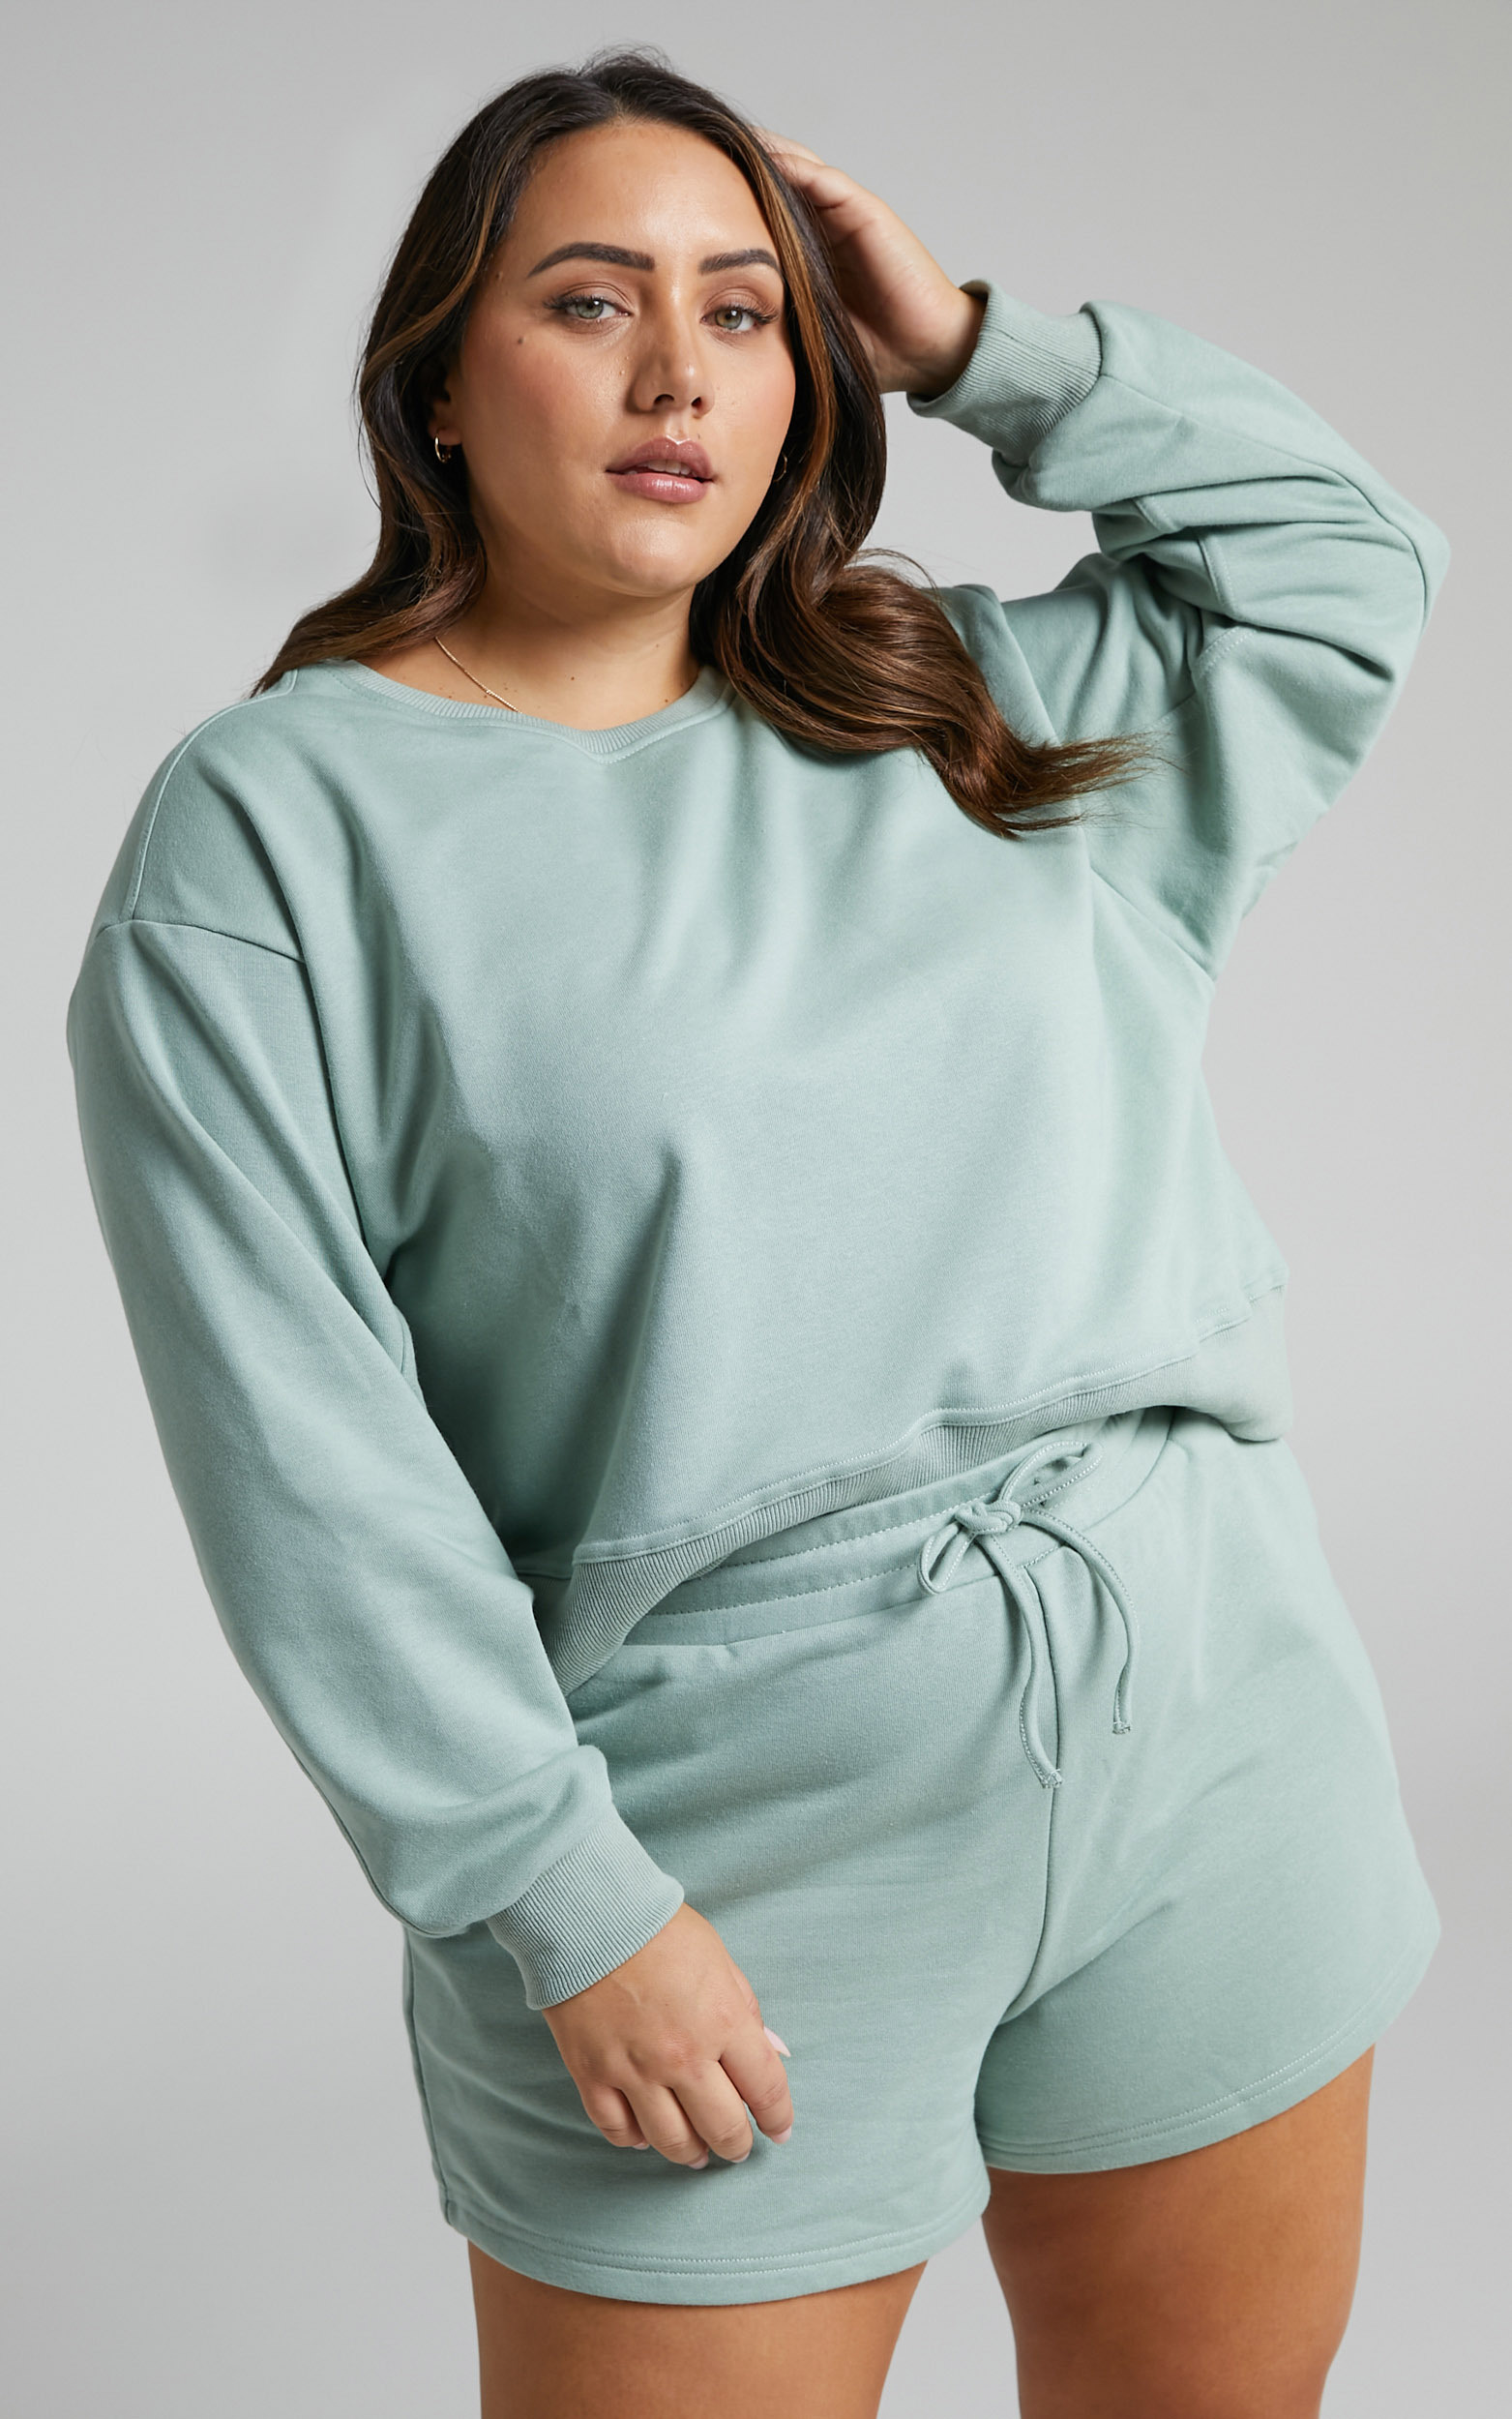 Jensome Boxy Fit Crop Jersey Sweater in Sage - 04, GRN1, hi-res image number null